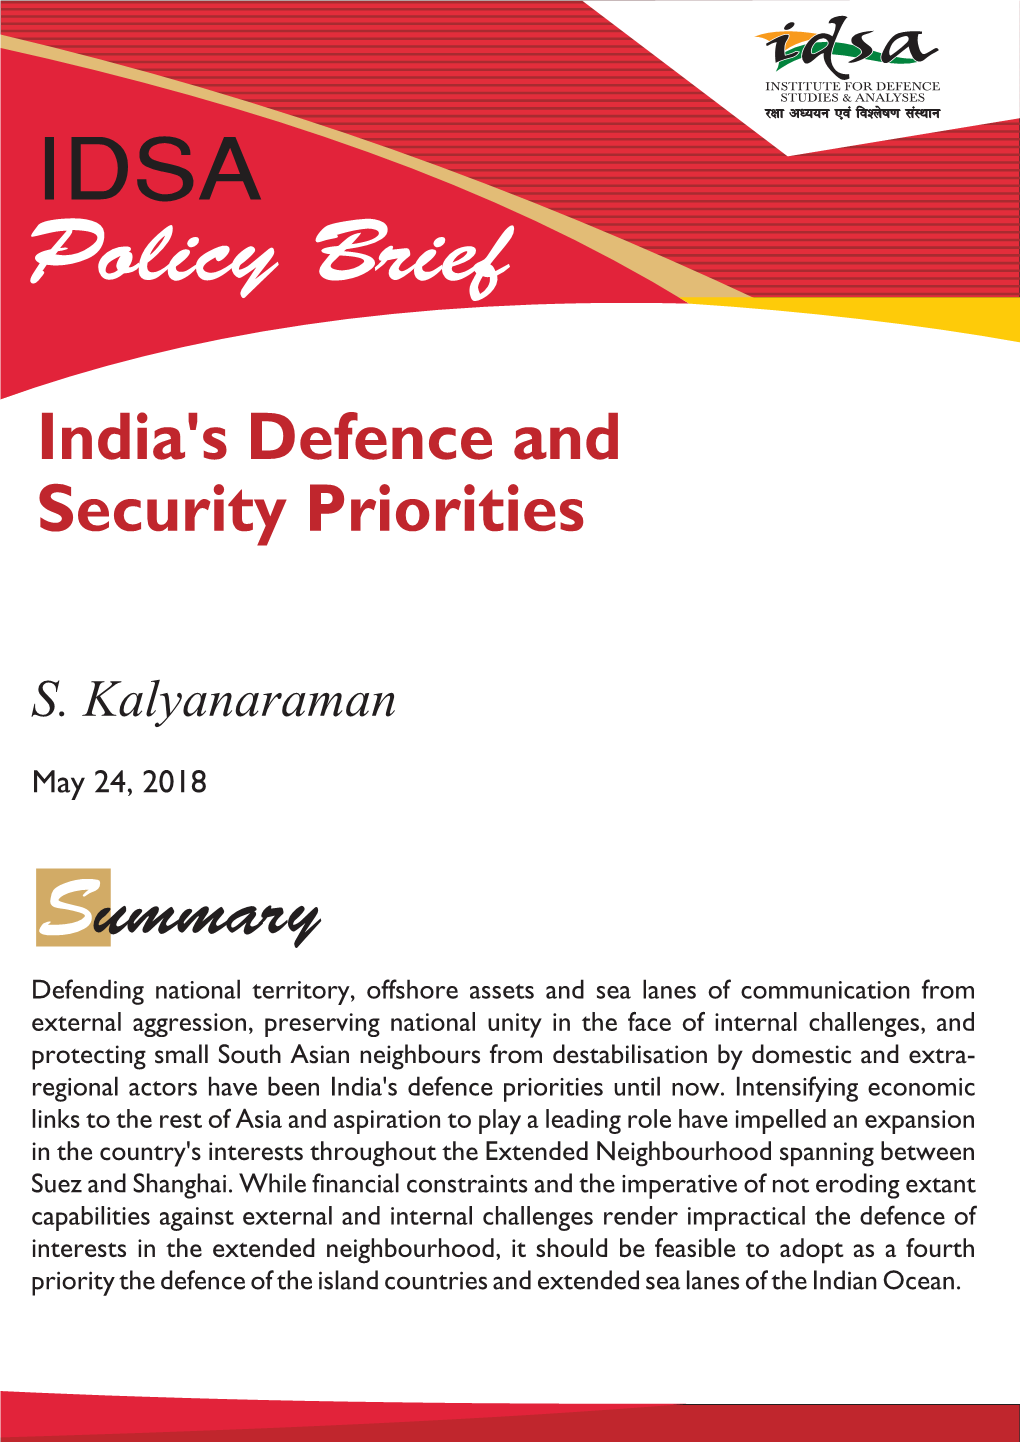 India's Defence and Security Priorities